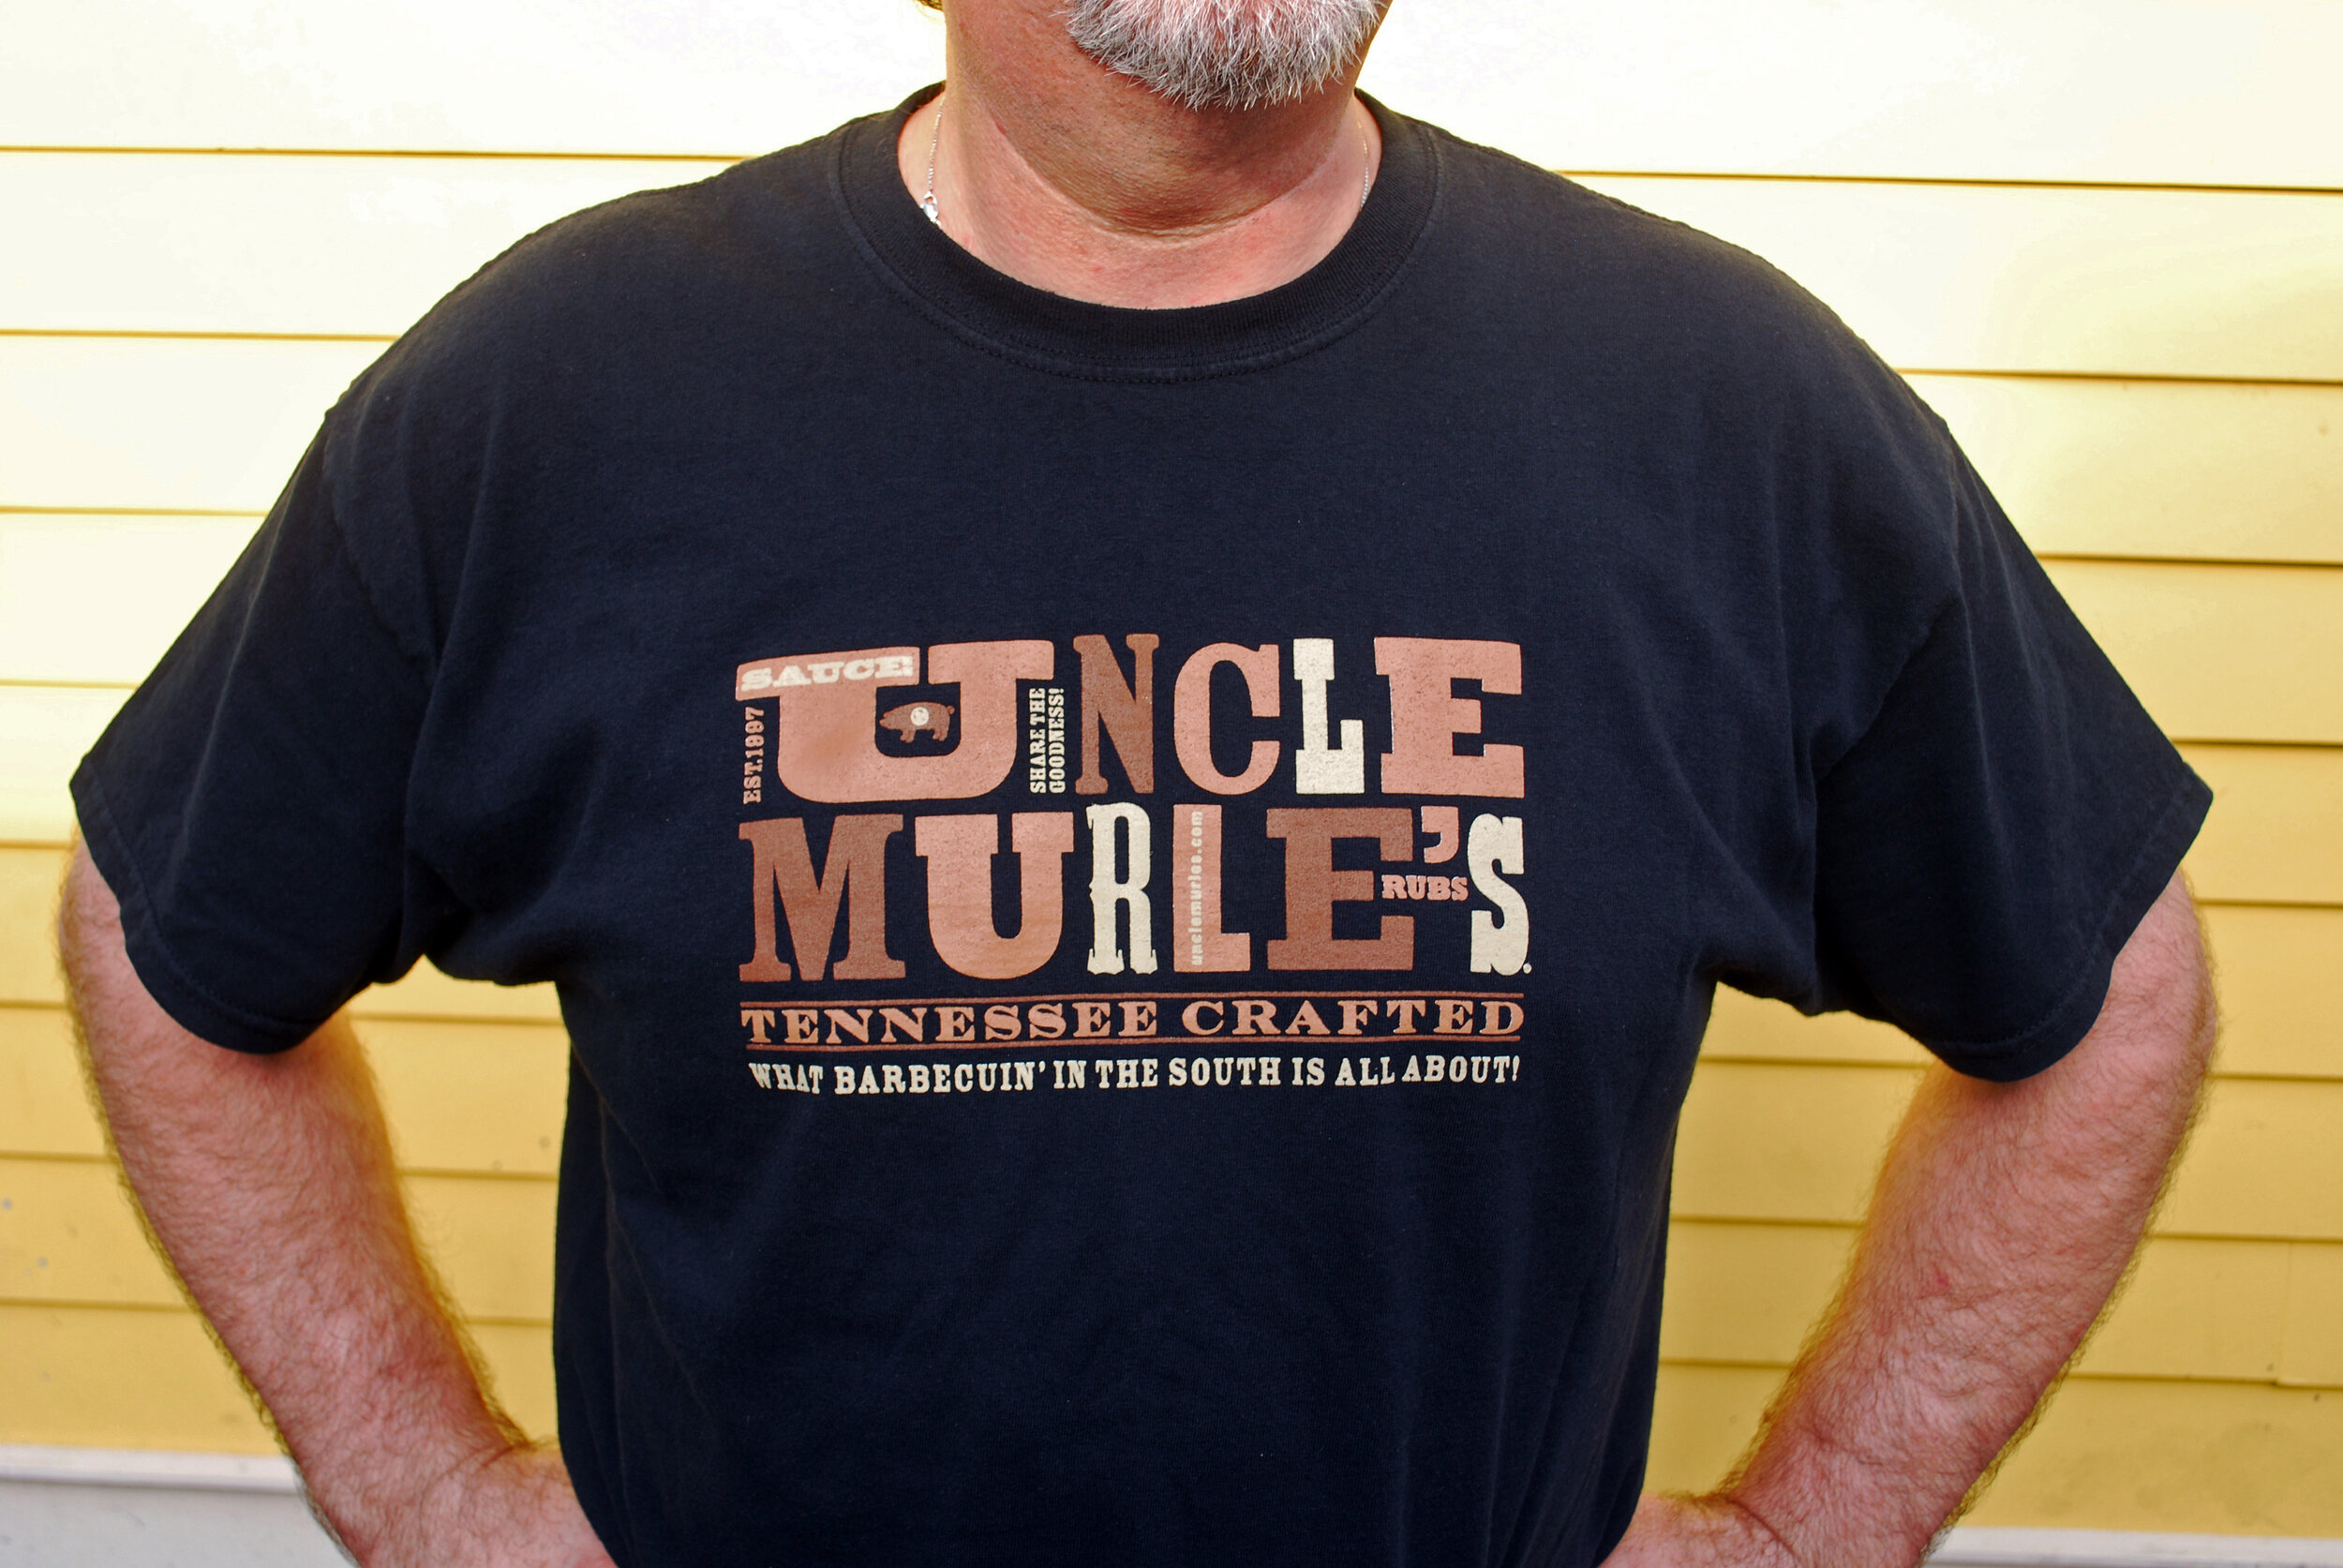  Uncle Murle’s BBQ team logo tee  Design by Chuck Mitchell 